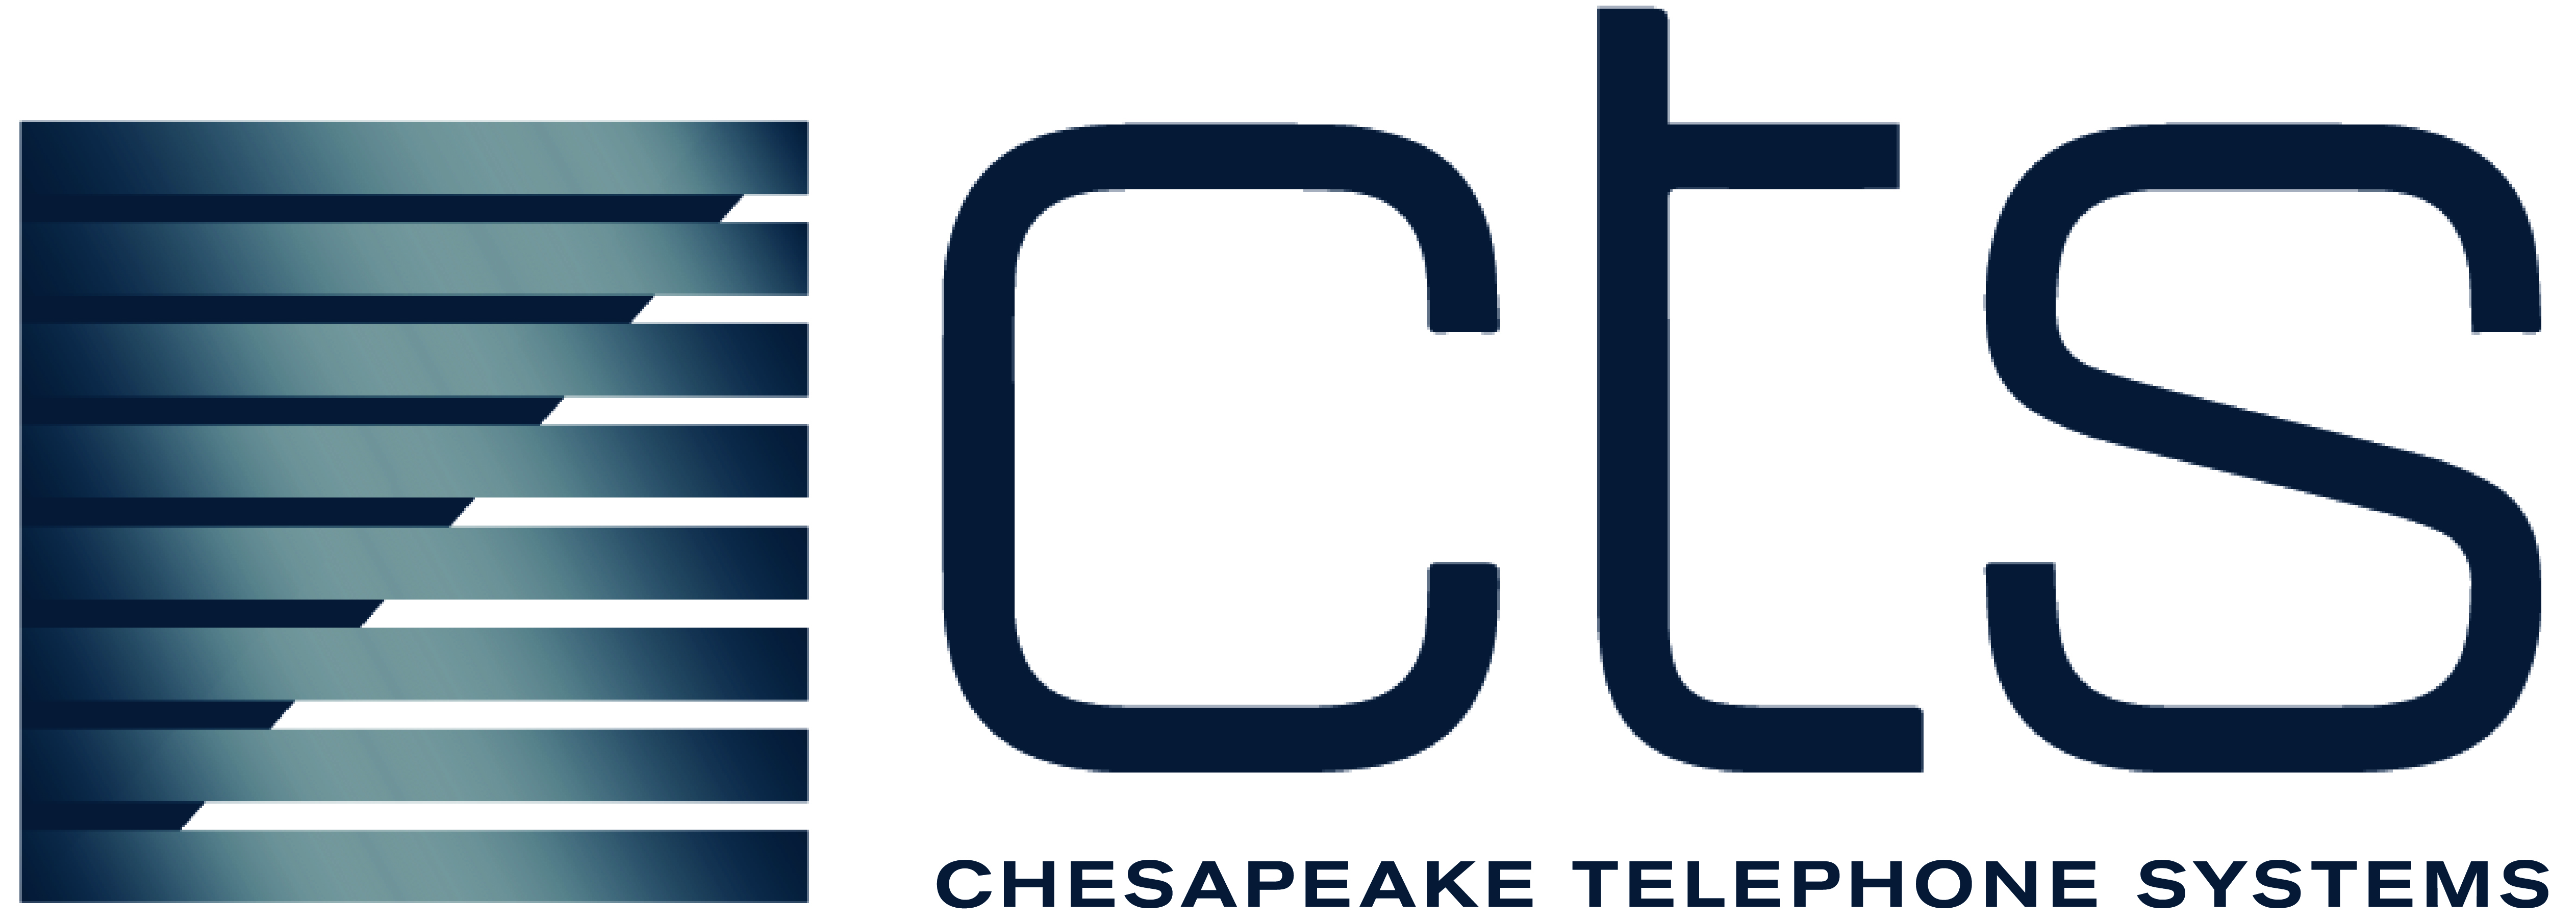 CTS - Chesapeake Telephone Systems